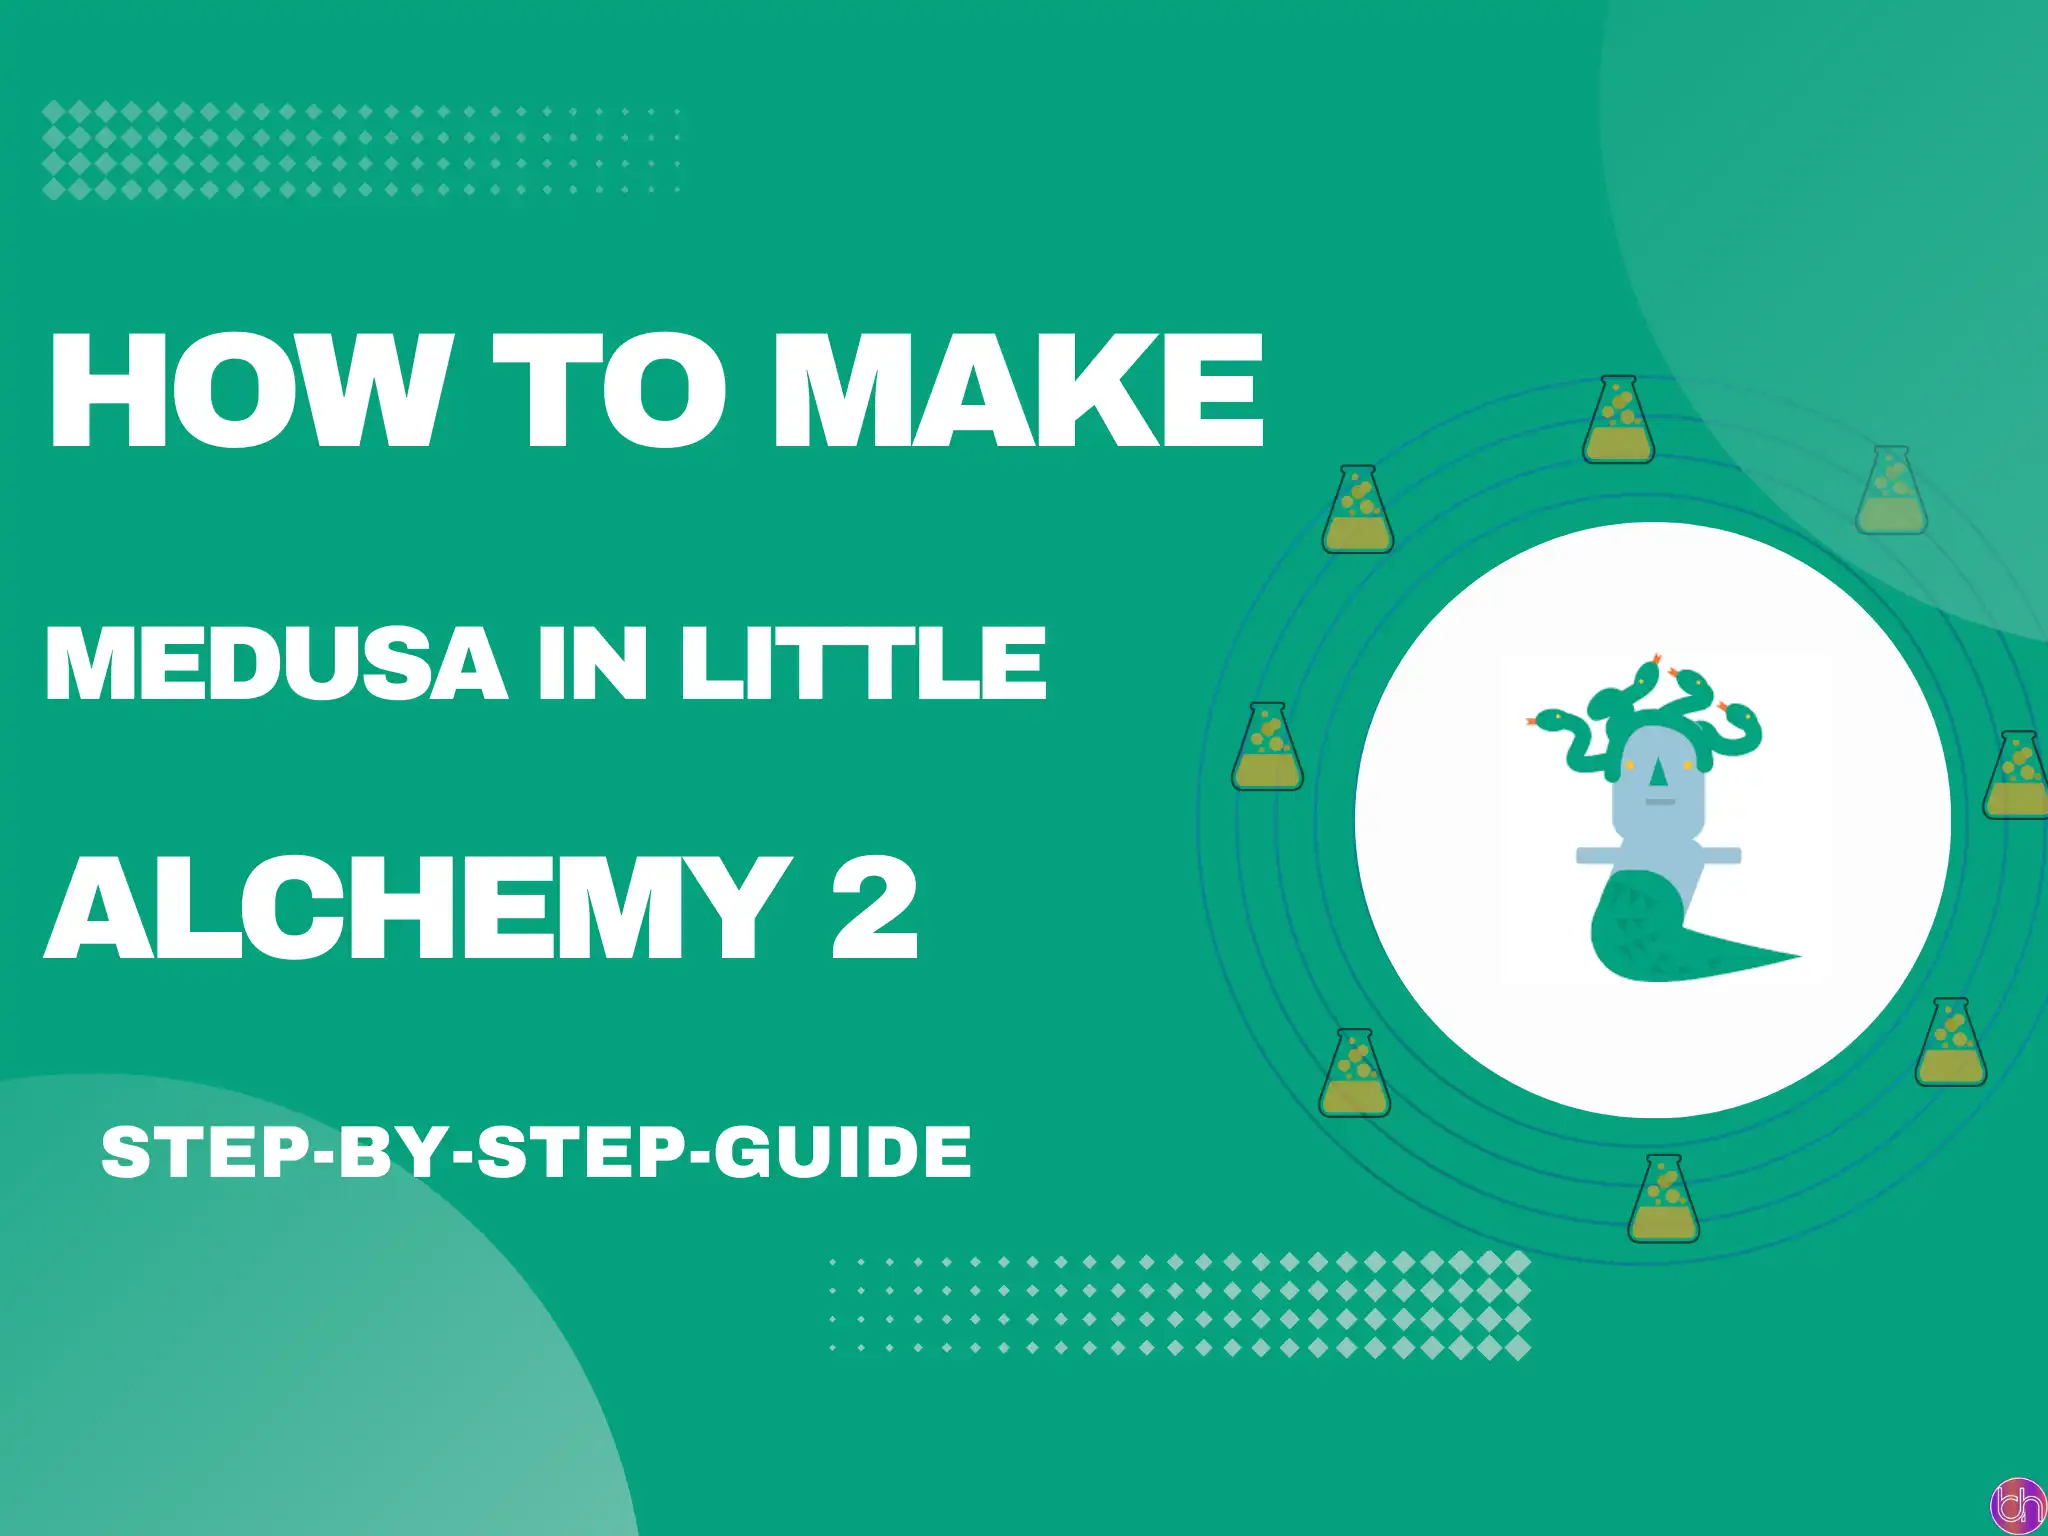 How to make Medusa in Little Alchemy 2